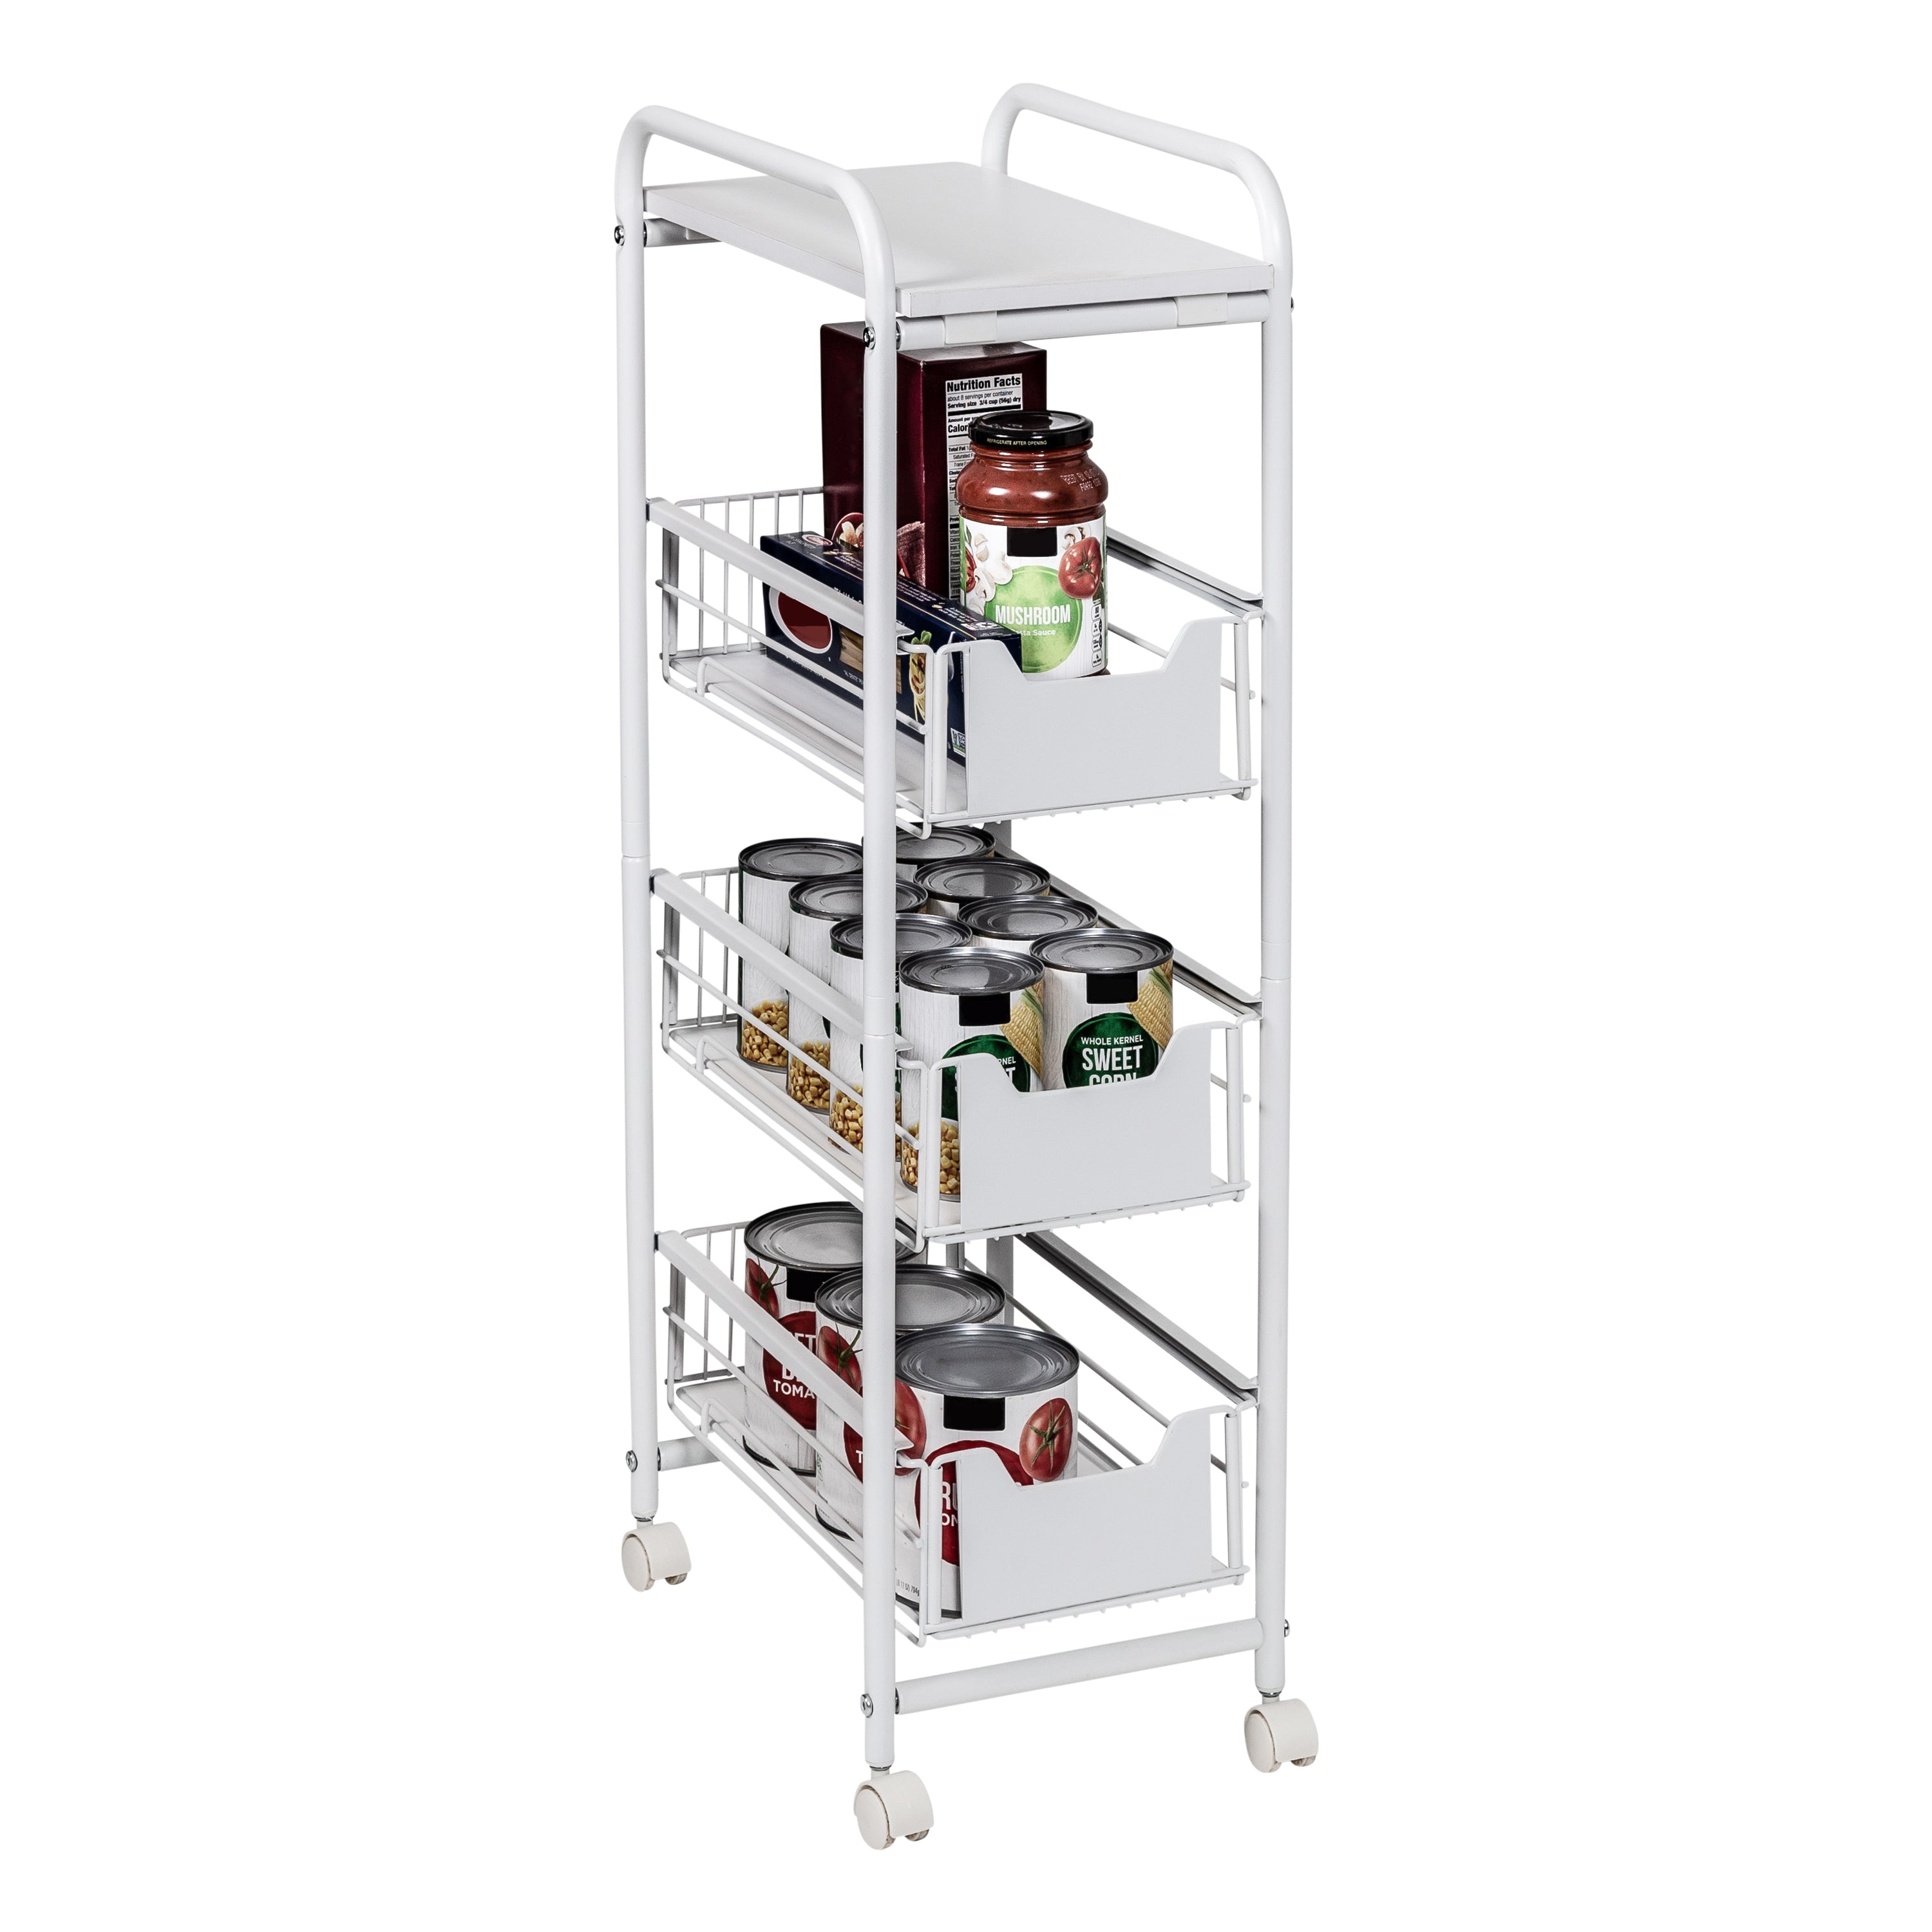 The Container Store Mesh Compact Fridge Cart